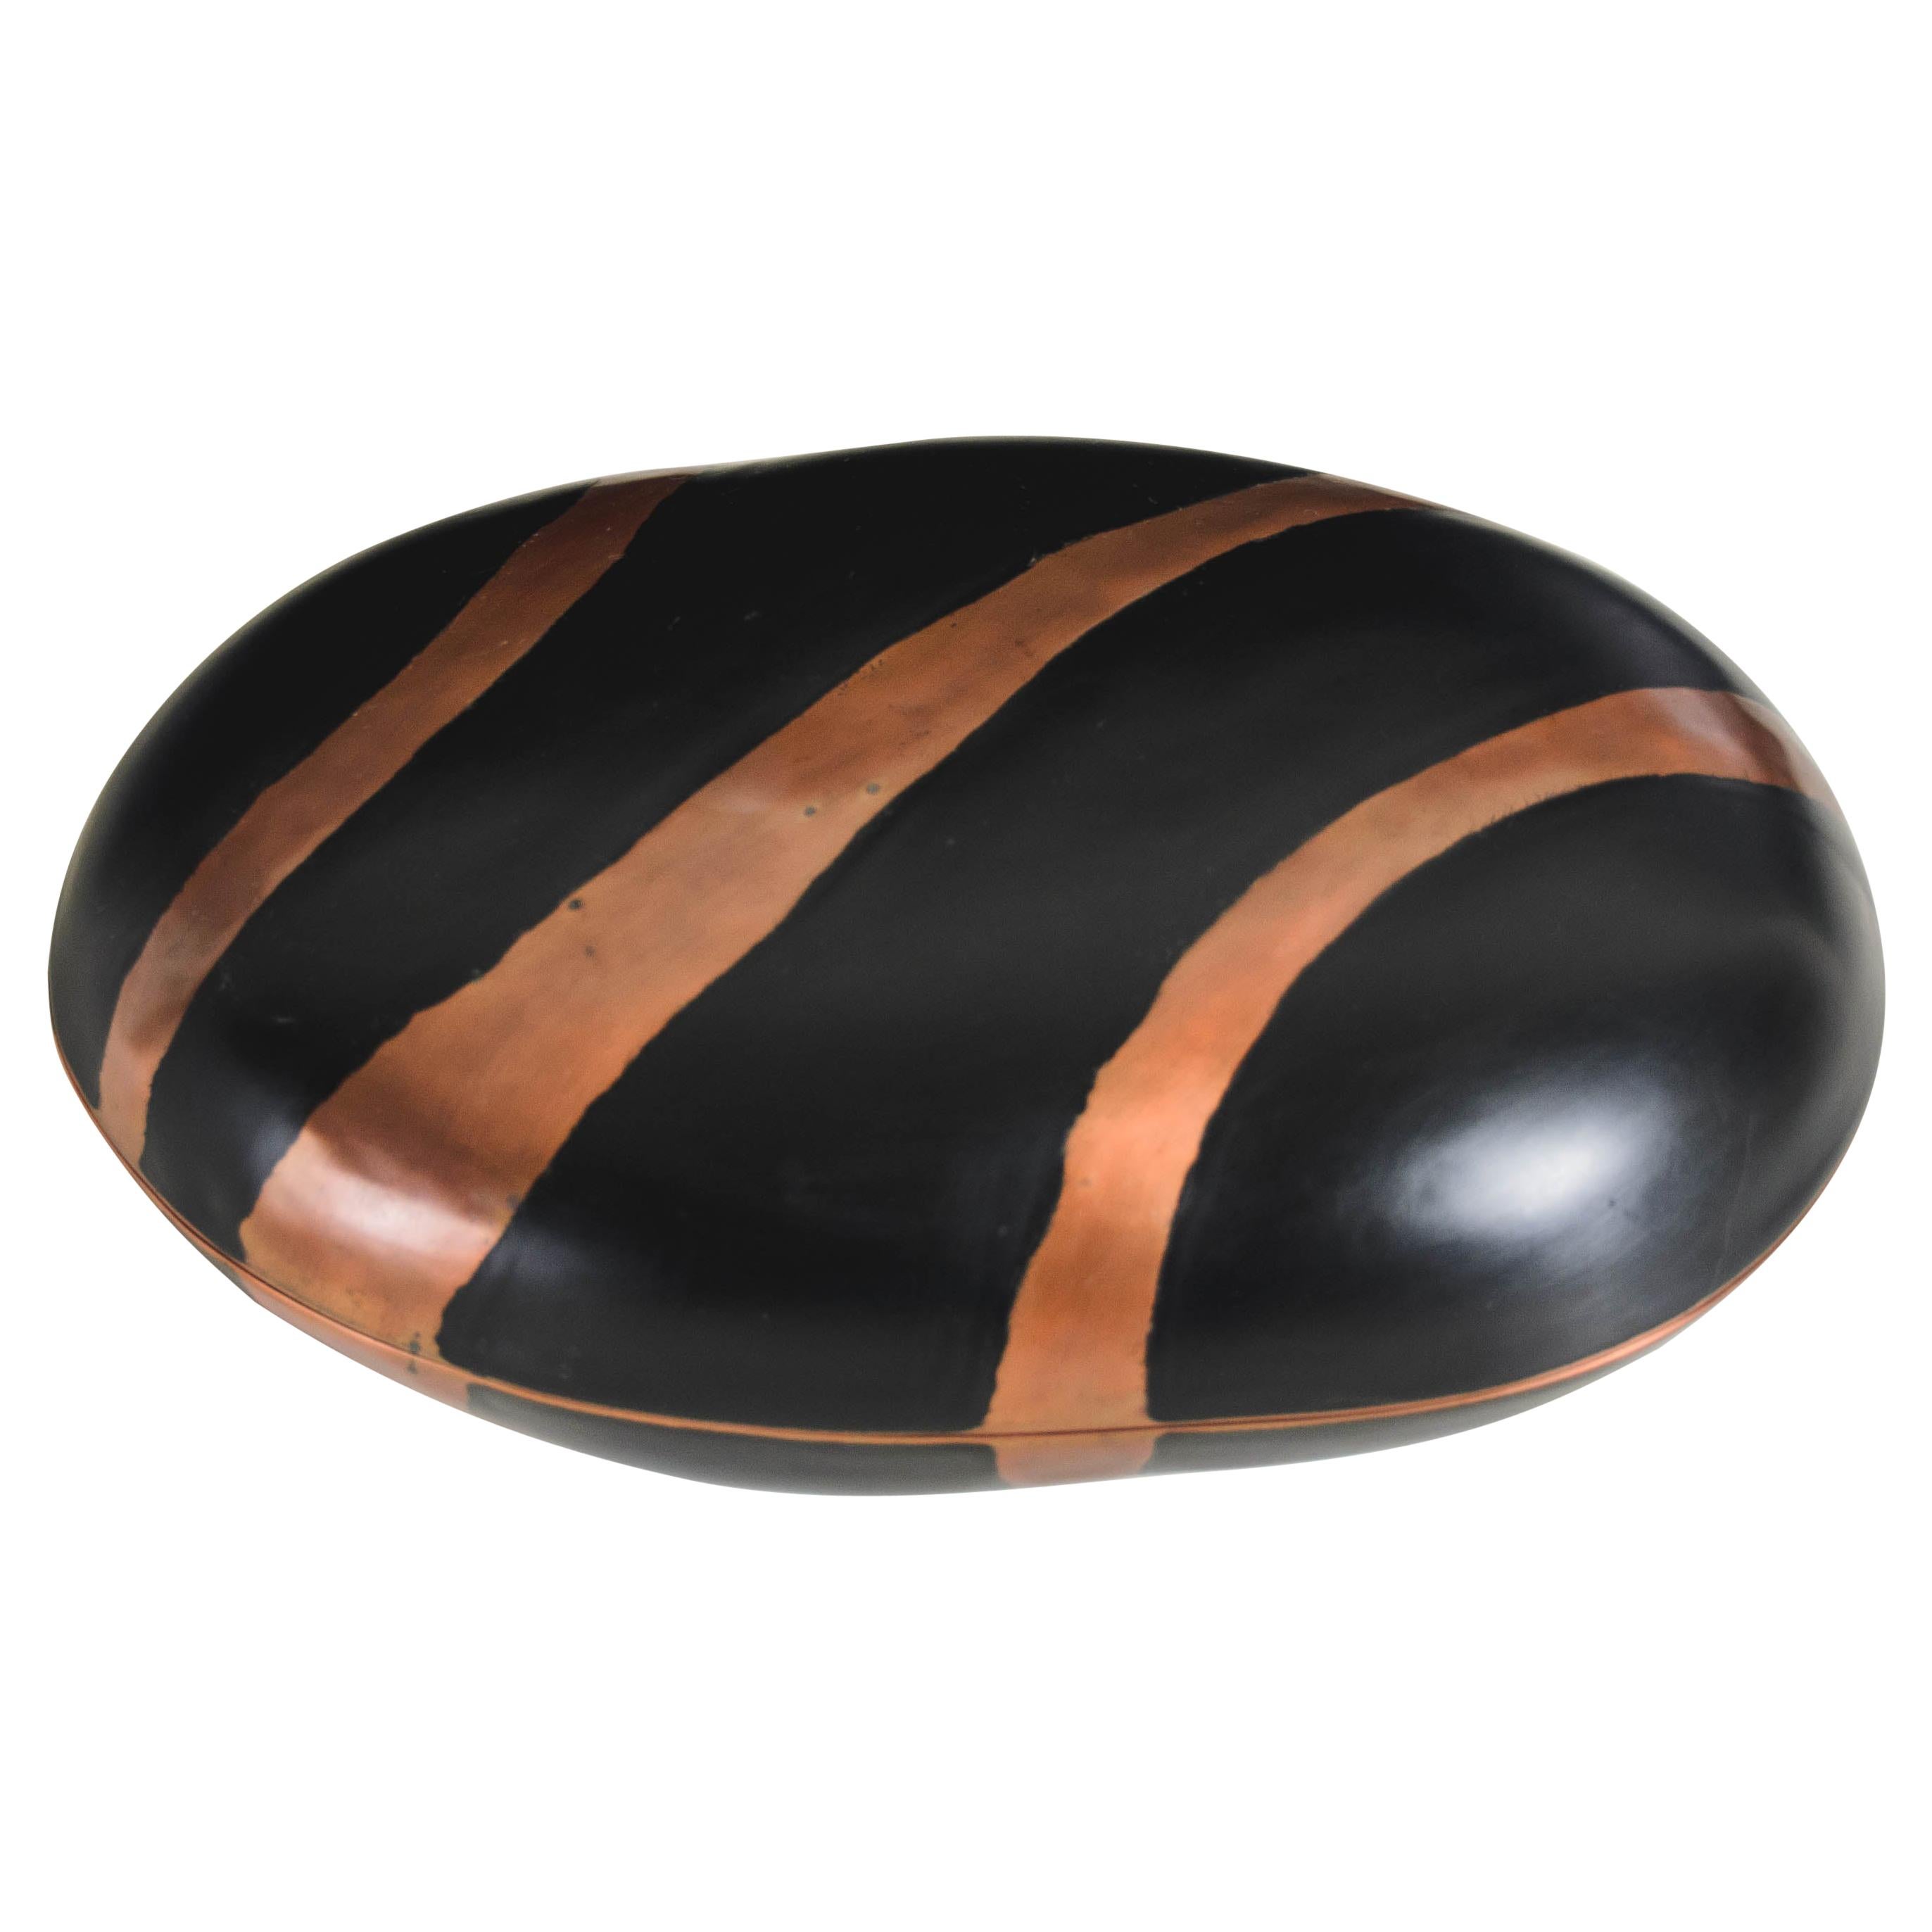 Small Zebra Box in Black Lacquer and Copper by Robert Kuo, Hand Repoussé